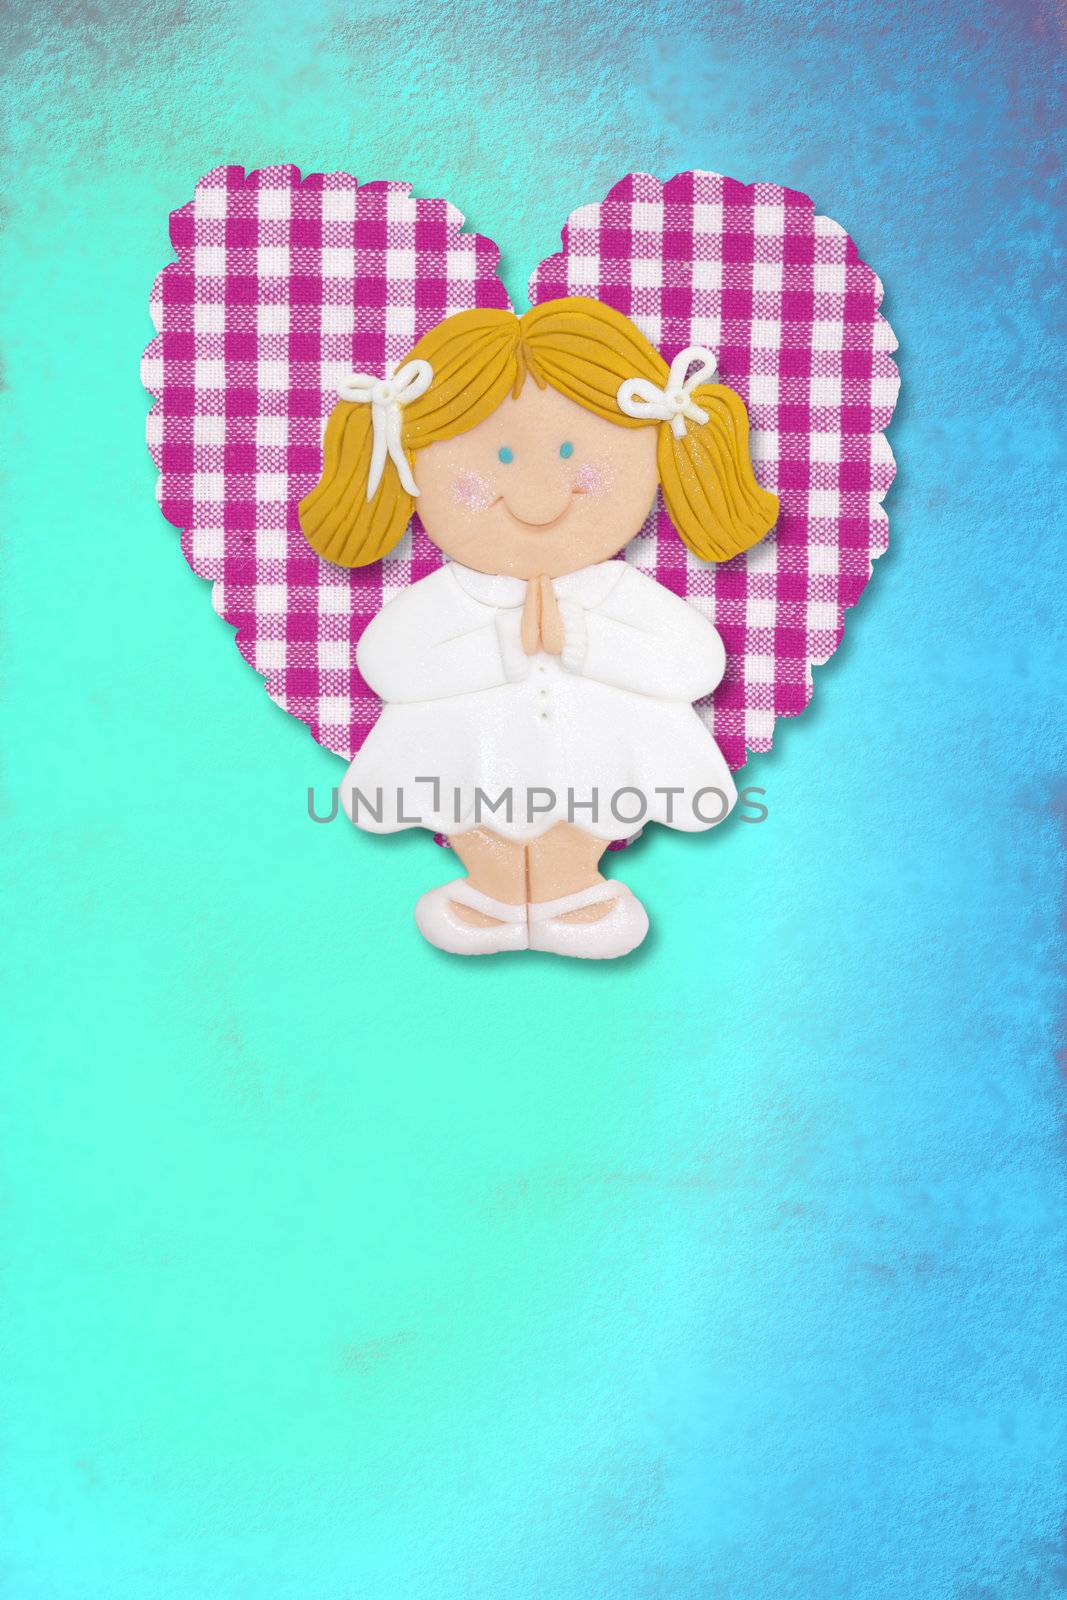 First Holy Communion Invitation Card, cute blond girl on blue background